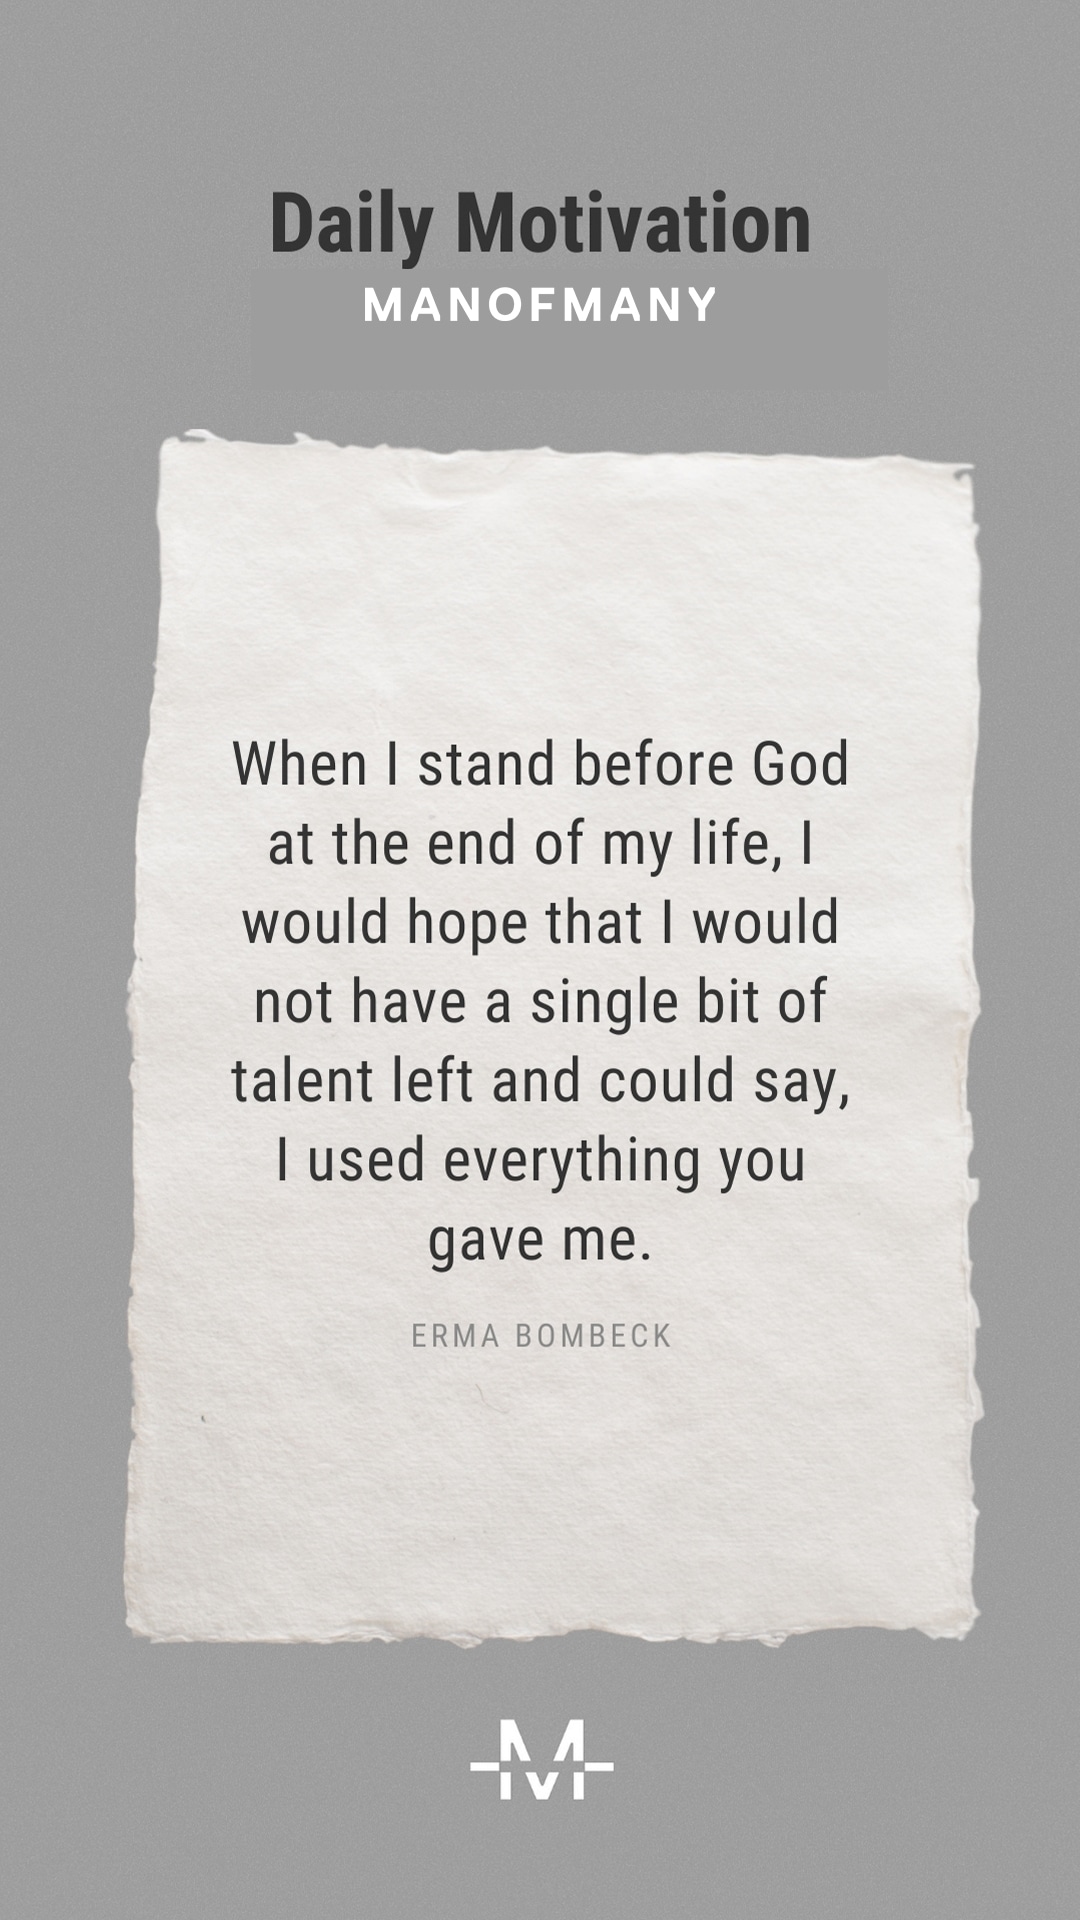 When I stand before God at the end of my life, I would hope that I would not have a single bit of talent left and could say, I used everything you gave me. –Erma Bombeck quote